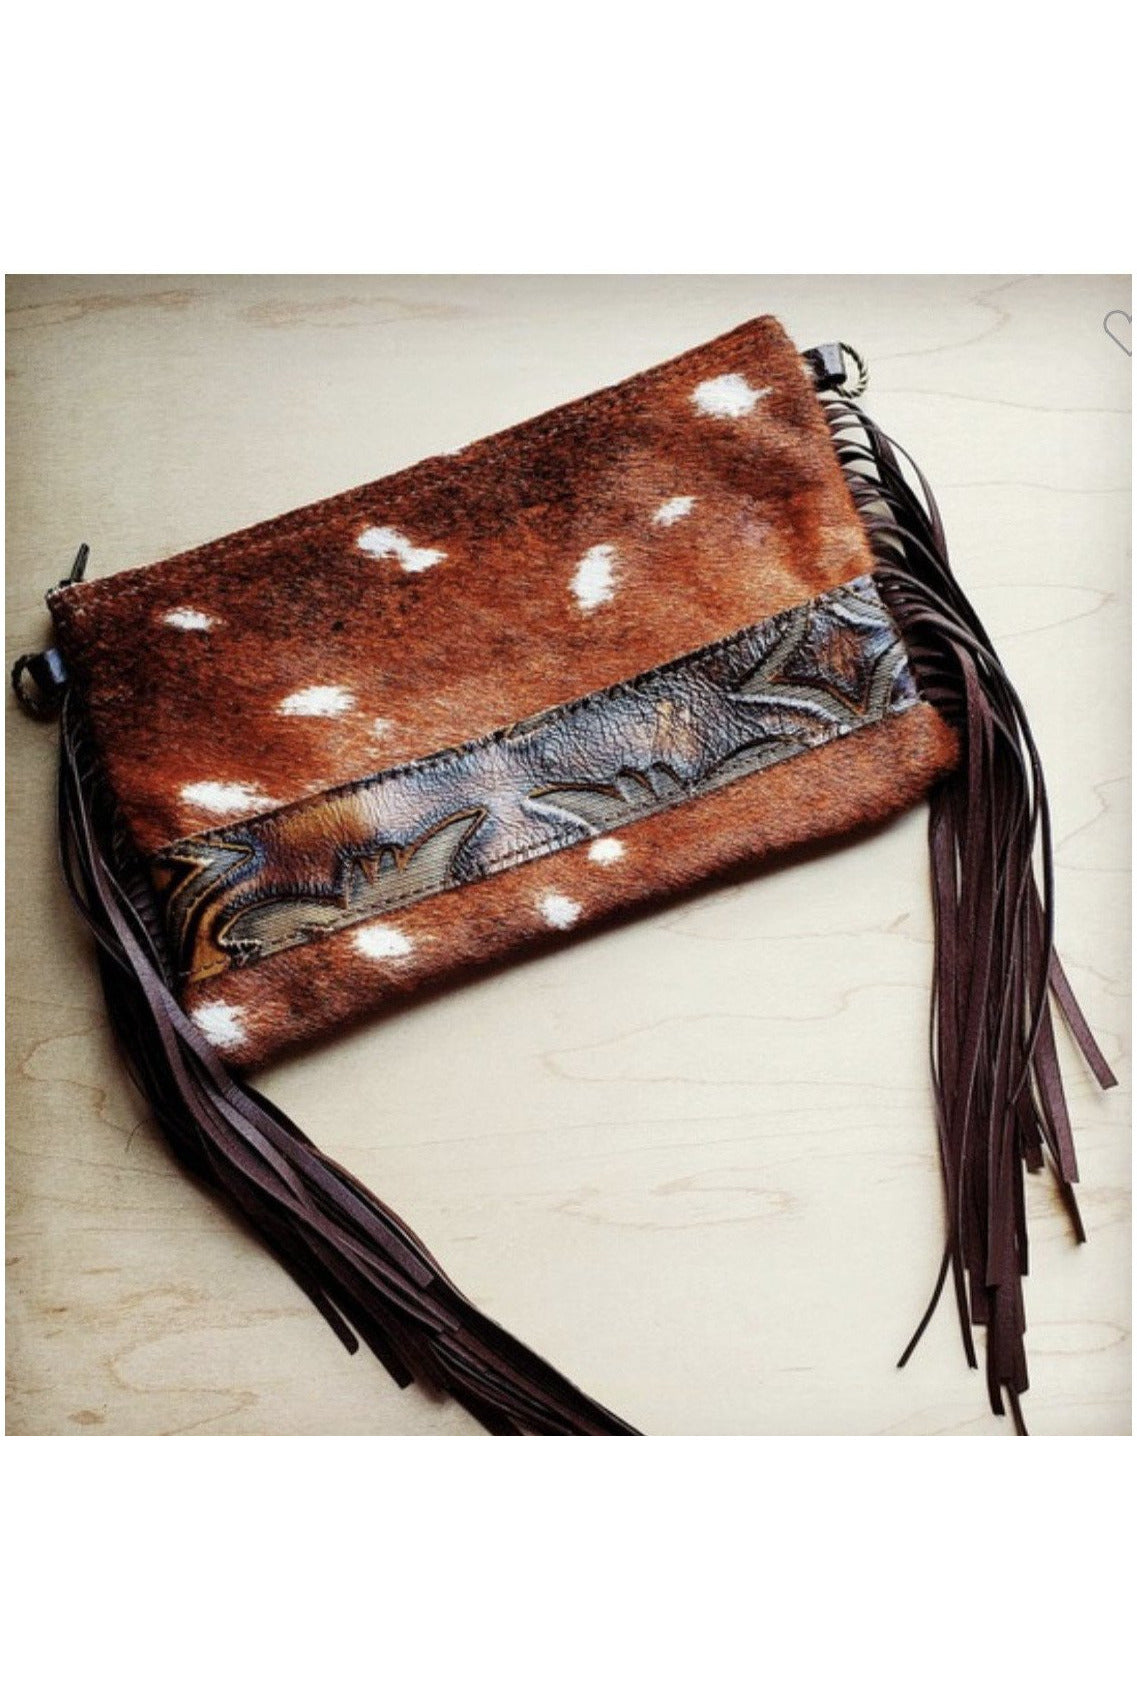 Axis Deer Cross Body / Clutch Bag by Stacy Leigh RESERVED for Jennifer |  Luxury bags collection, Burberry gifts, Fur bag